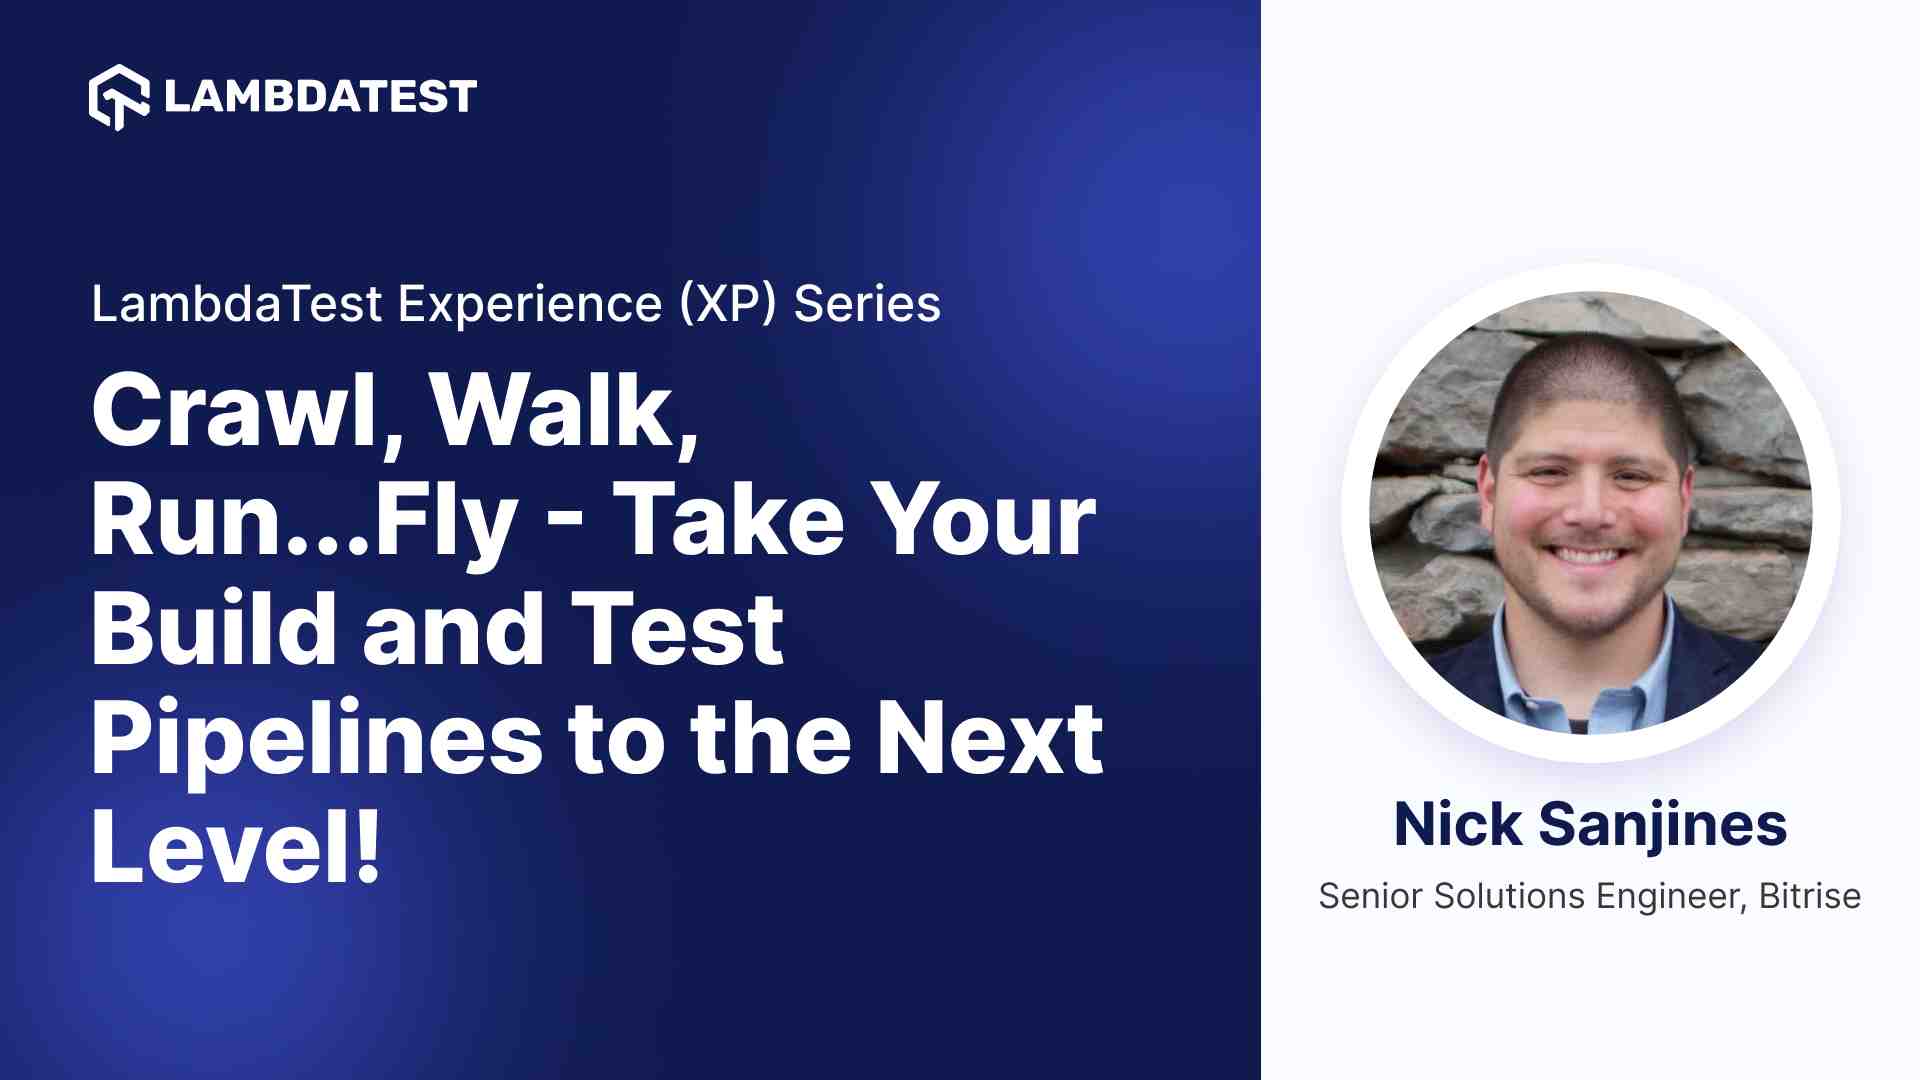 Crawl, Walk, Run...Fly - Take your build and test pipeline to the next level!